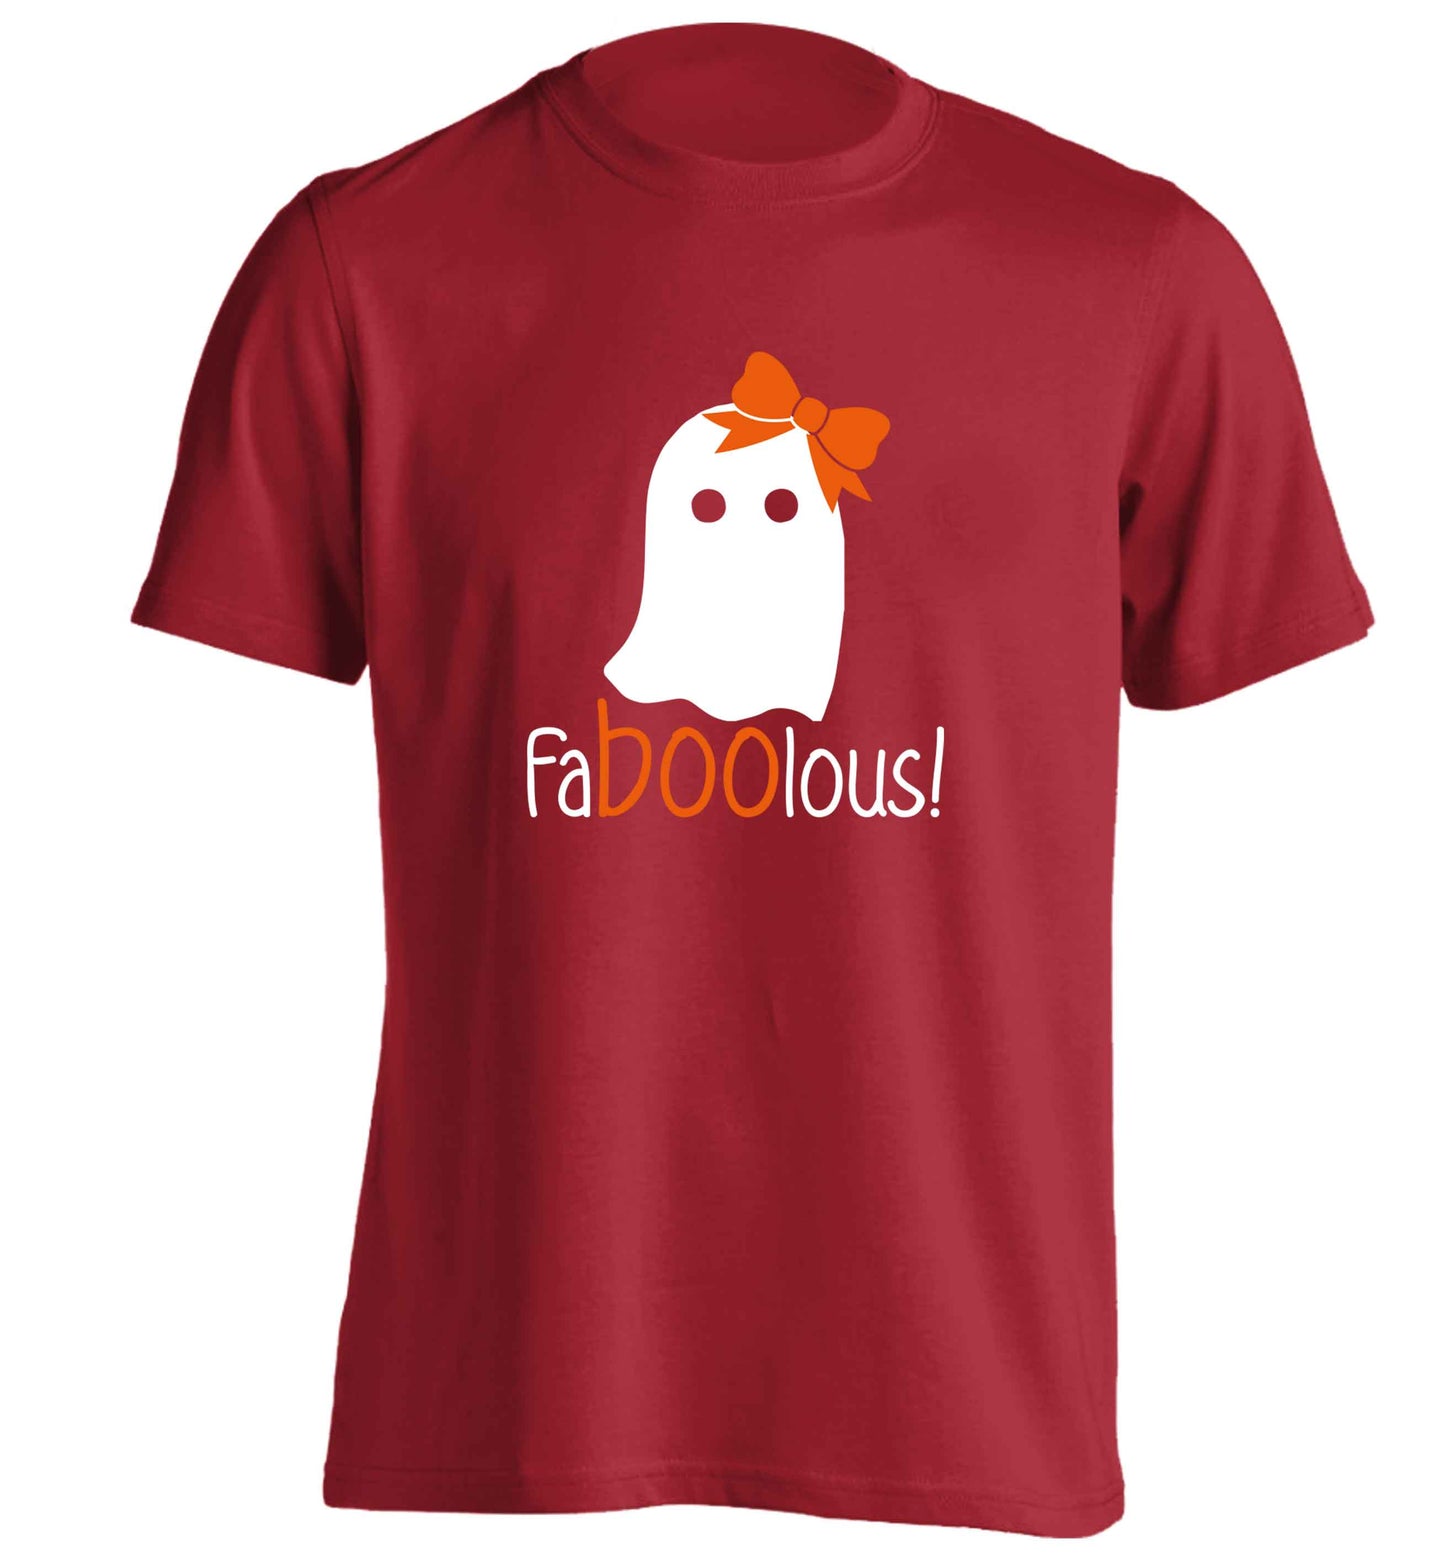 Faboolous ghost adults unisex red Tshirt 2XL